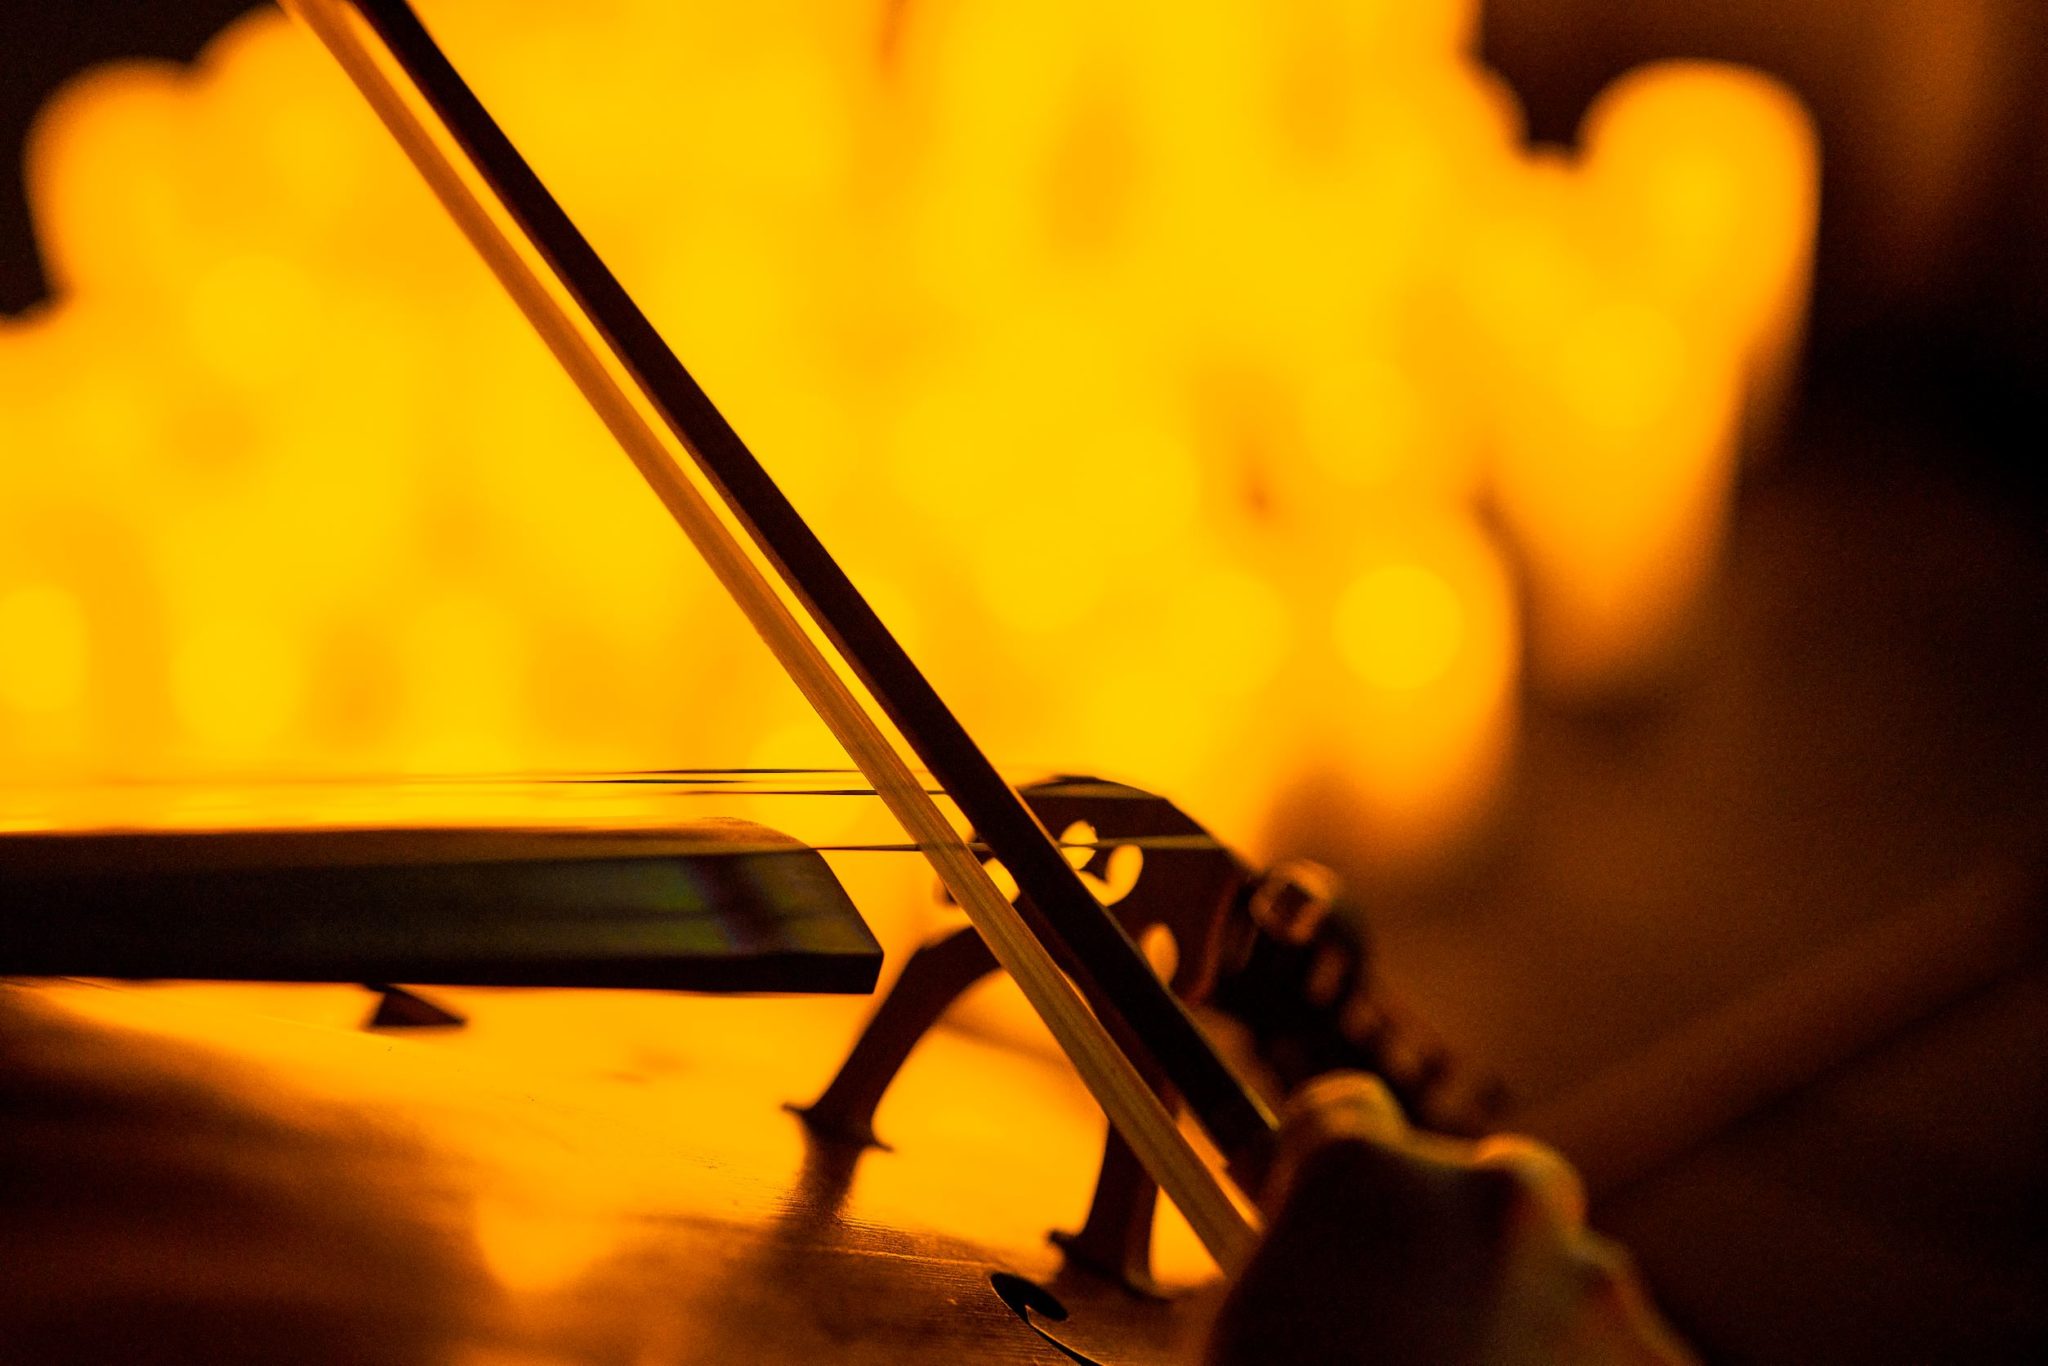 A close-up of a bow playing a string instrument with the blurry images of candles in the background.